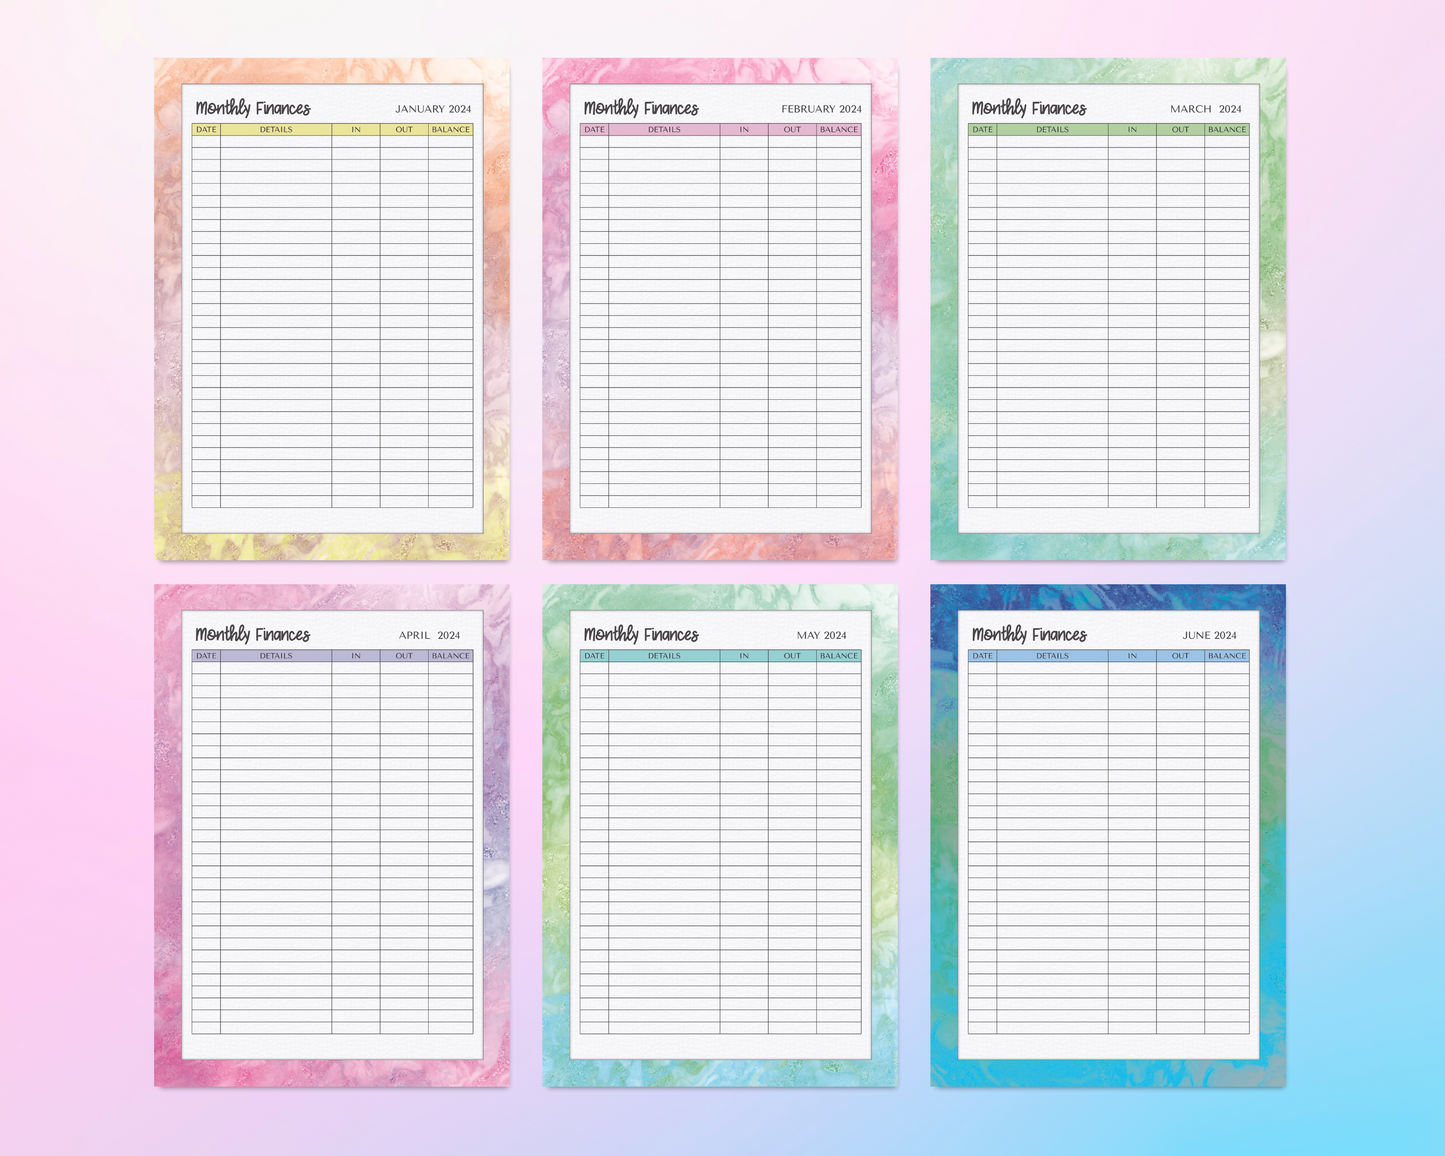 The UnPlanNeR 2024 - Fully Dated Colour A4 PDF Planner